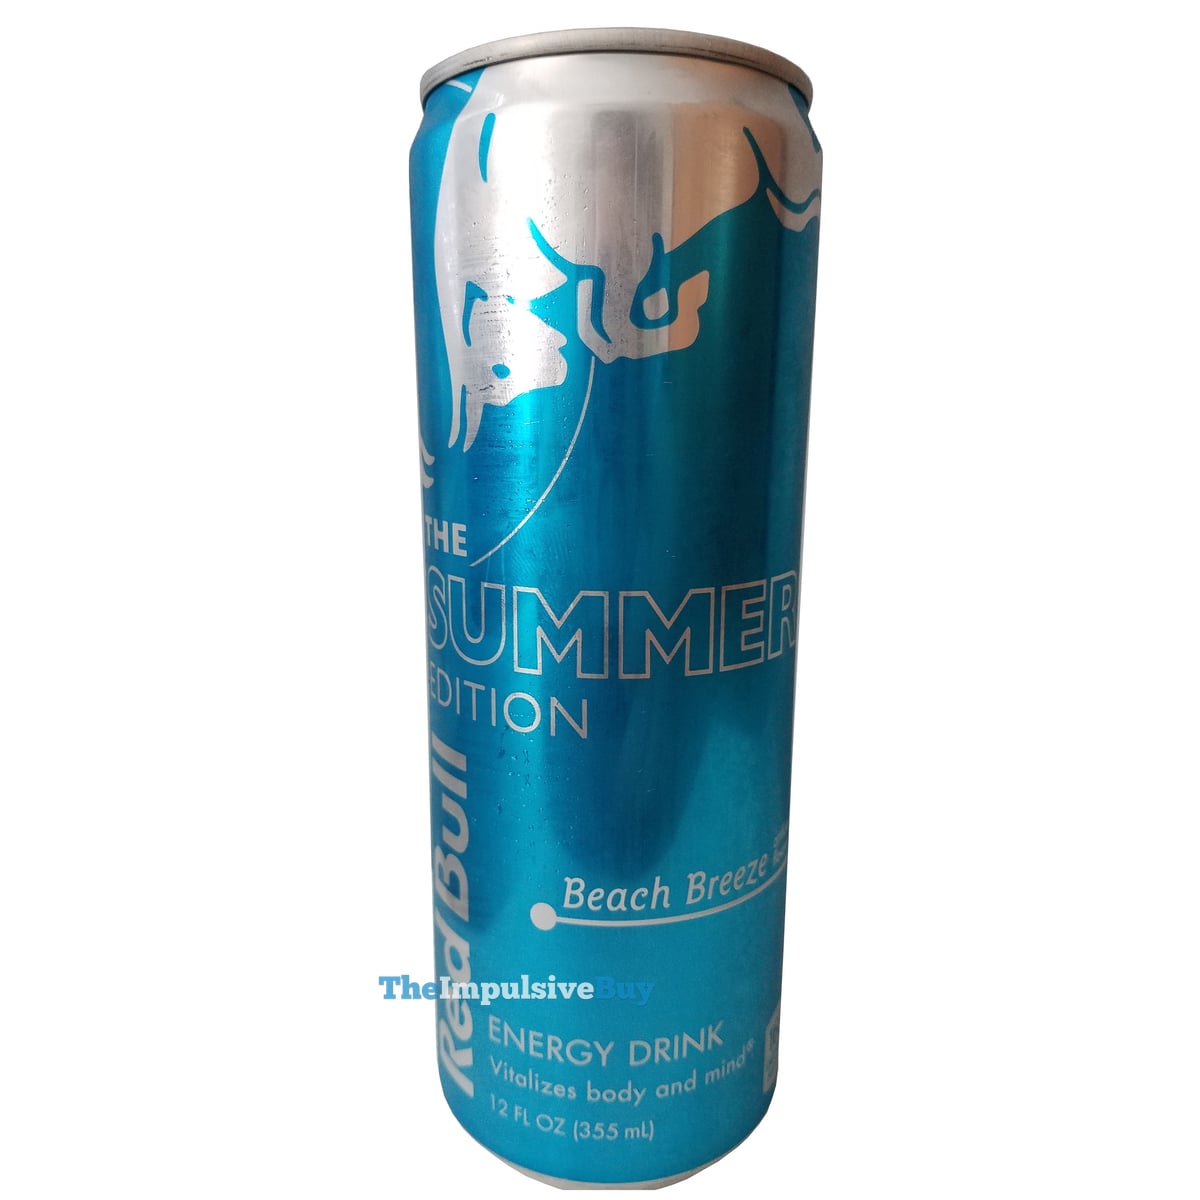 REVIEW: Red Bull Summer Edition Beach - The Impulsive Buy